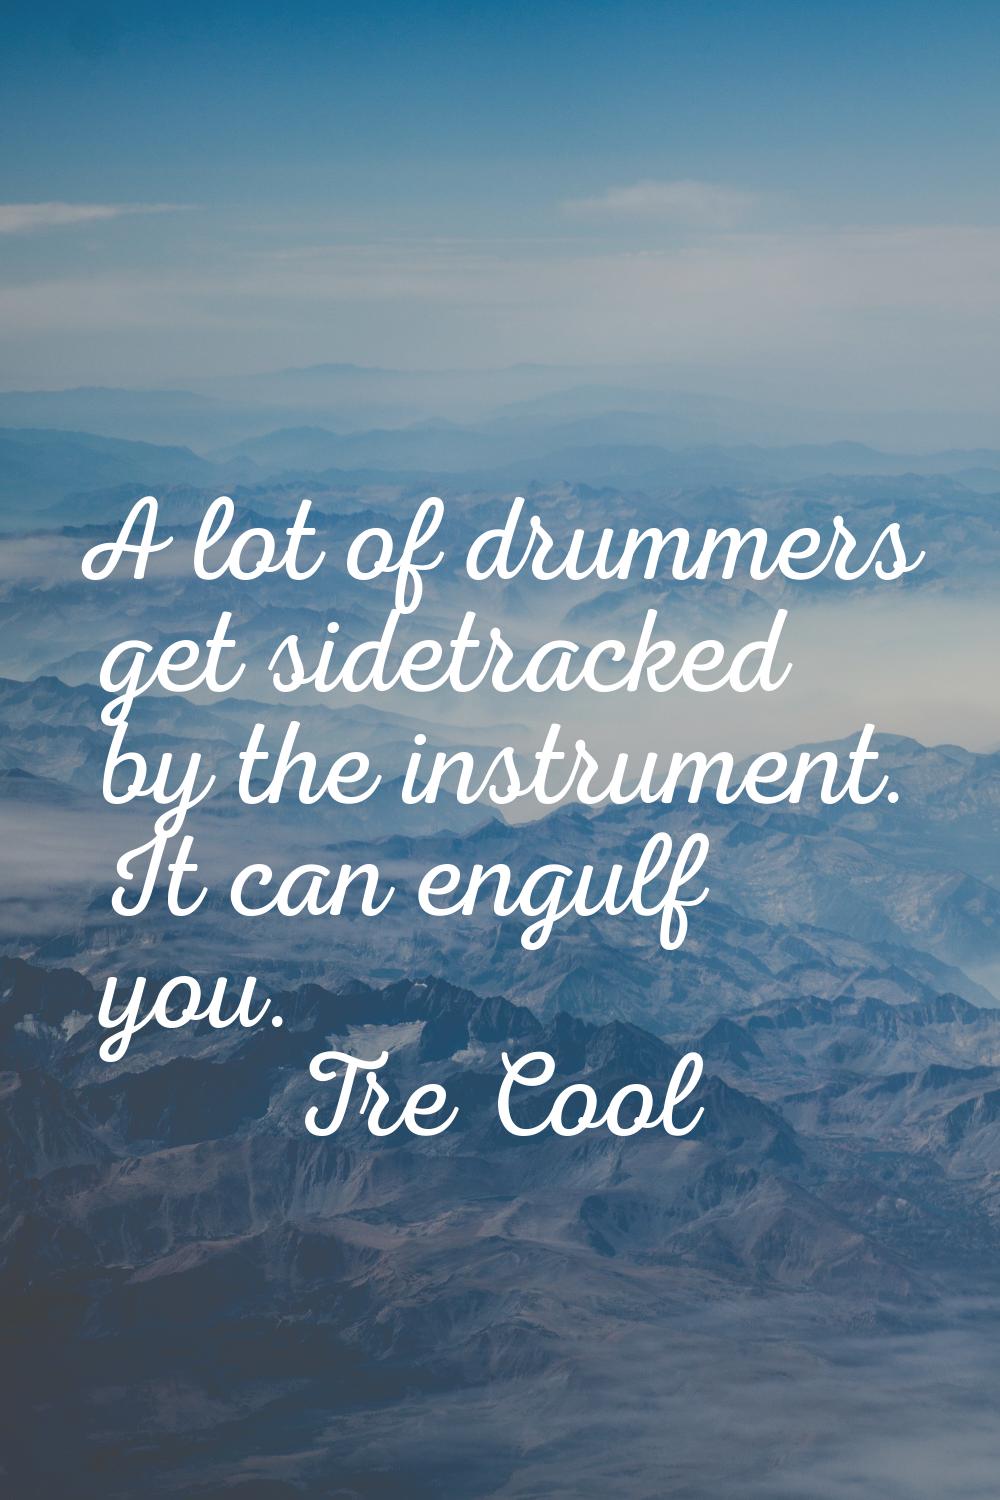 A lot of drummers get sidetracked by the instrument. It can engulf you.